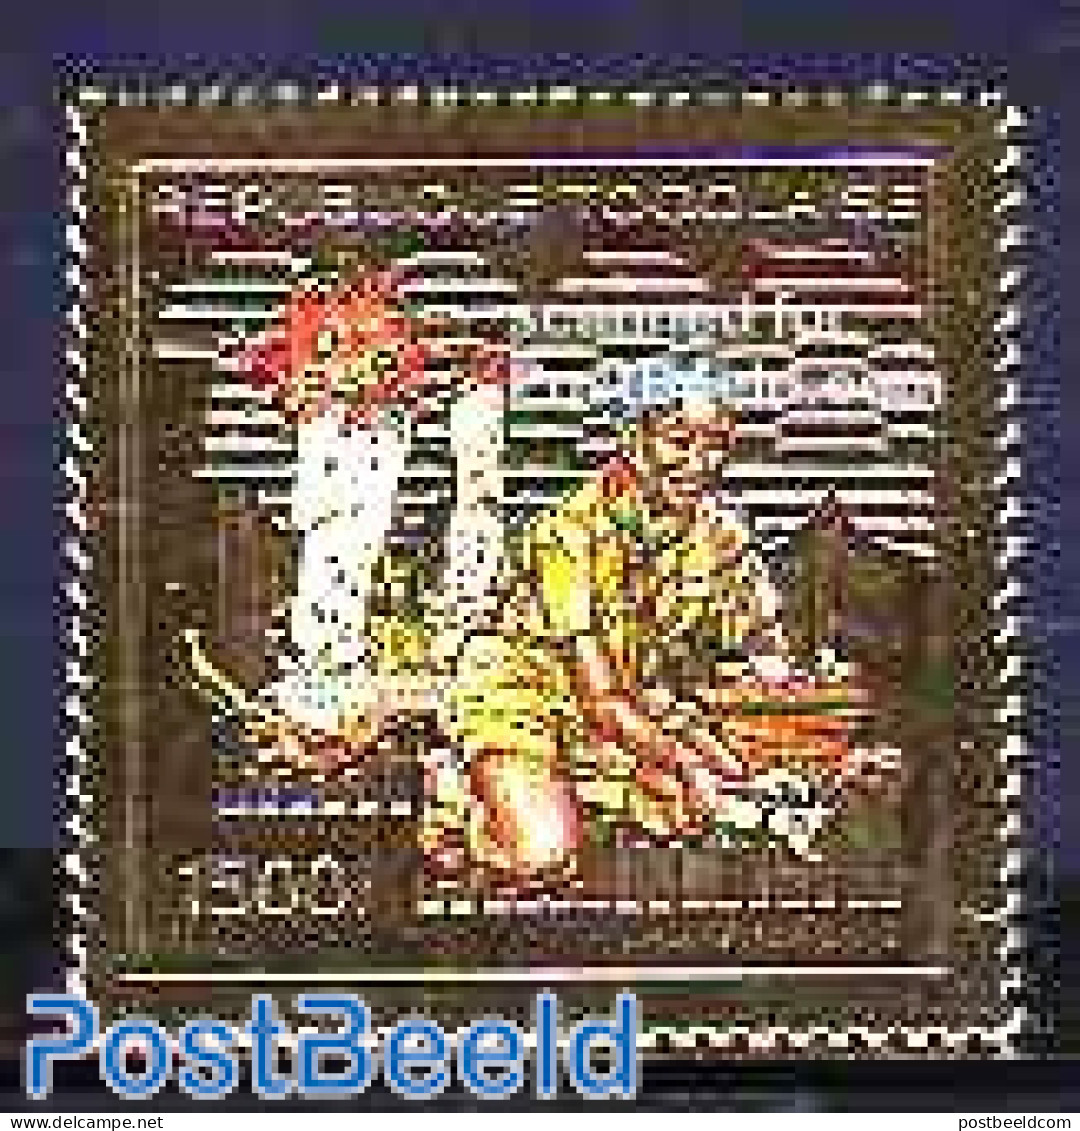 Togo 1990 Scouting 1v, Gold, Mint NH, Nature - Sport - Butterflies - Mushrooms - Scouting - Pilze